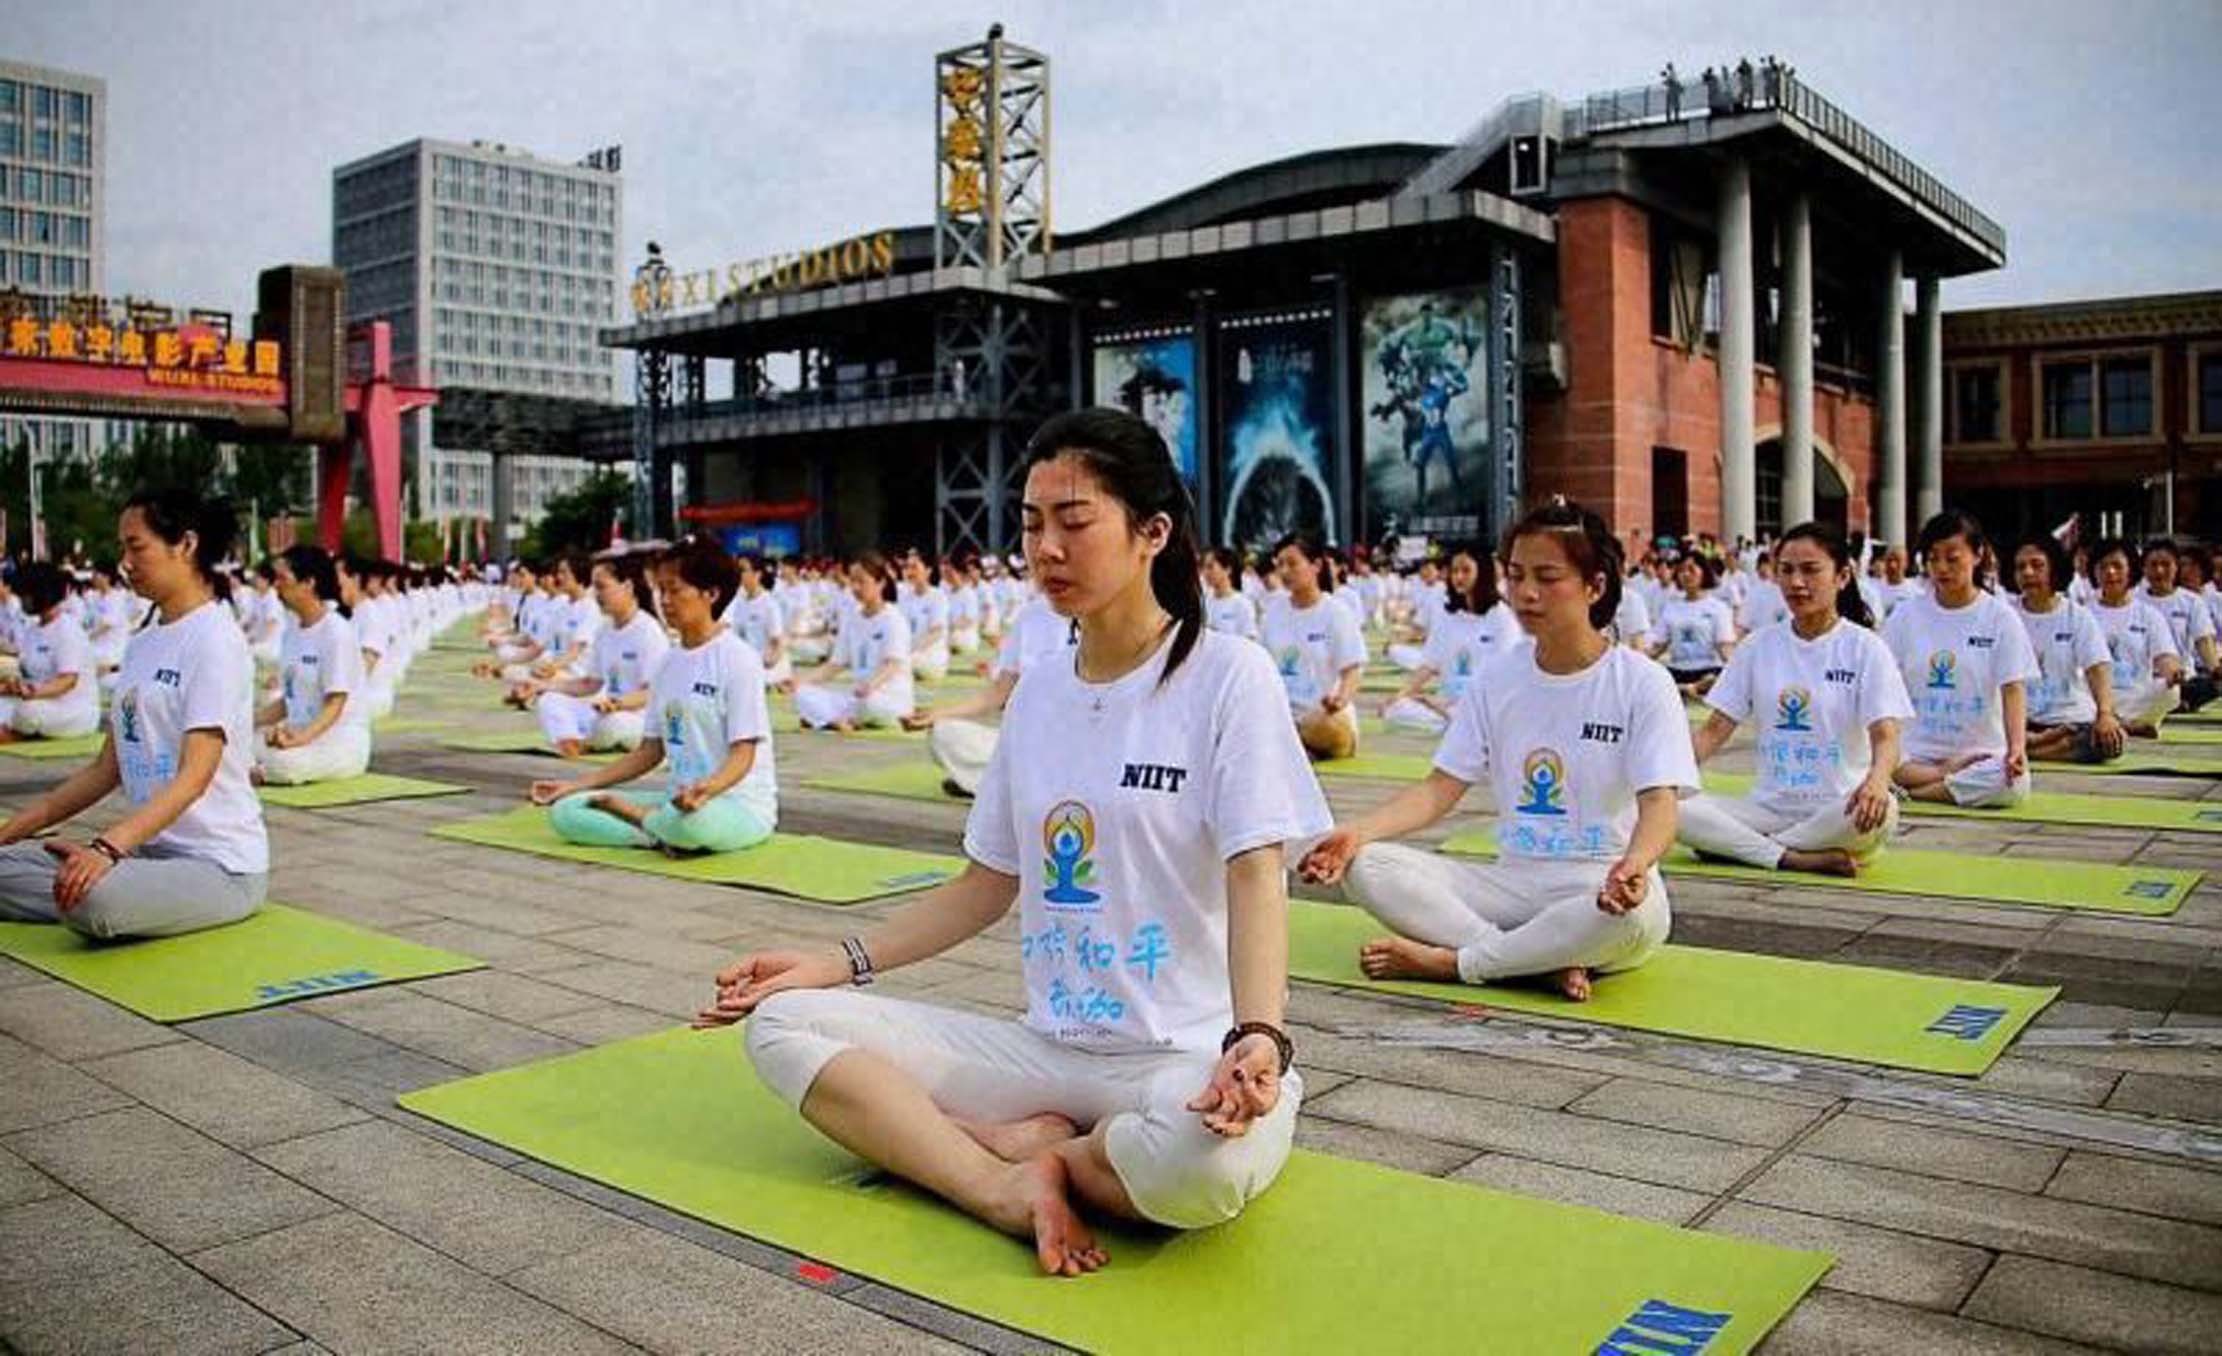 A Survey on Opportunity, Scope and Possibilities of Yoga Intervention in Modern China